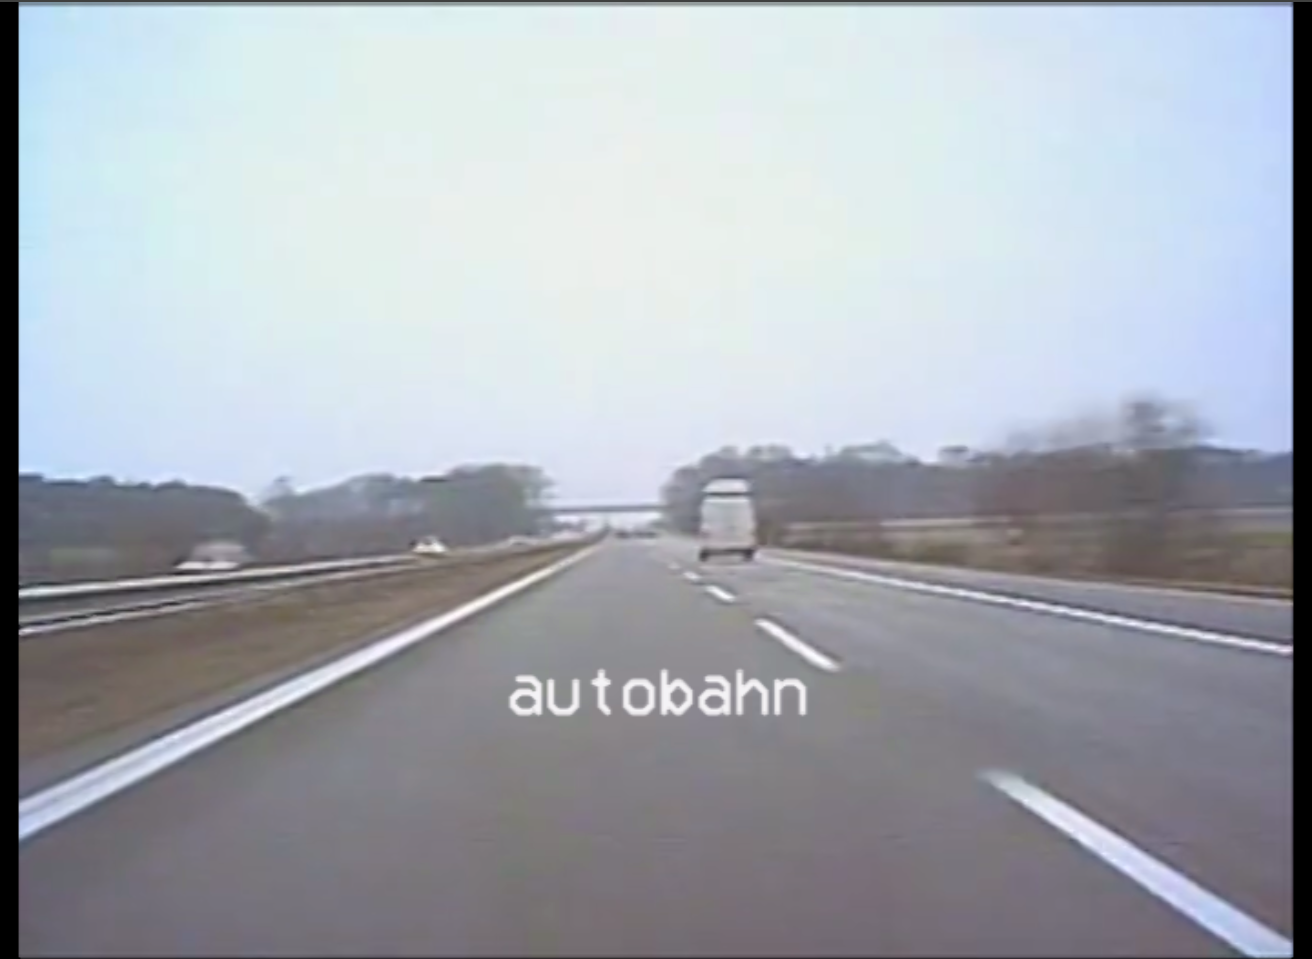 europe.co - autobahn cover